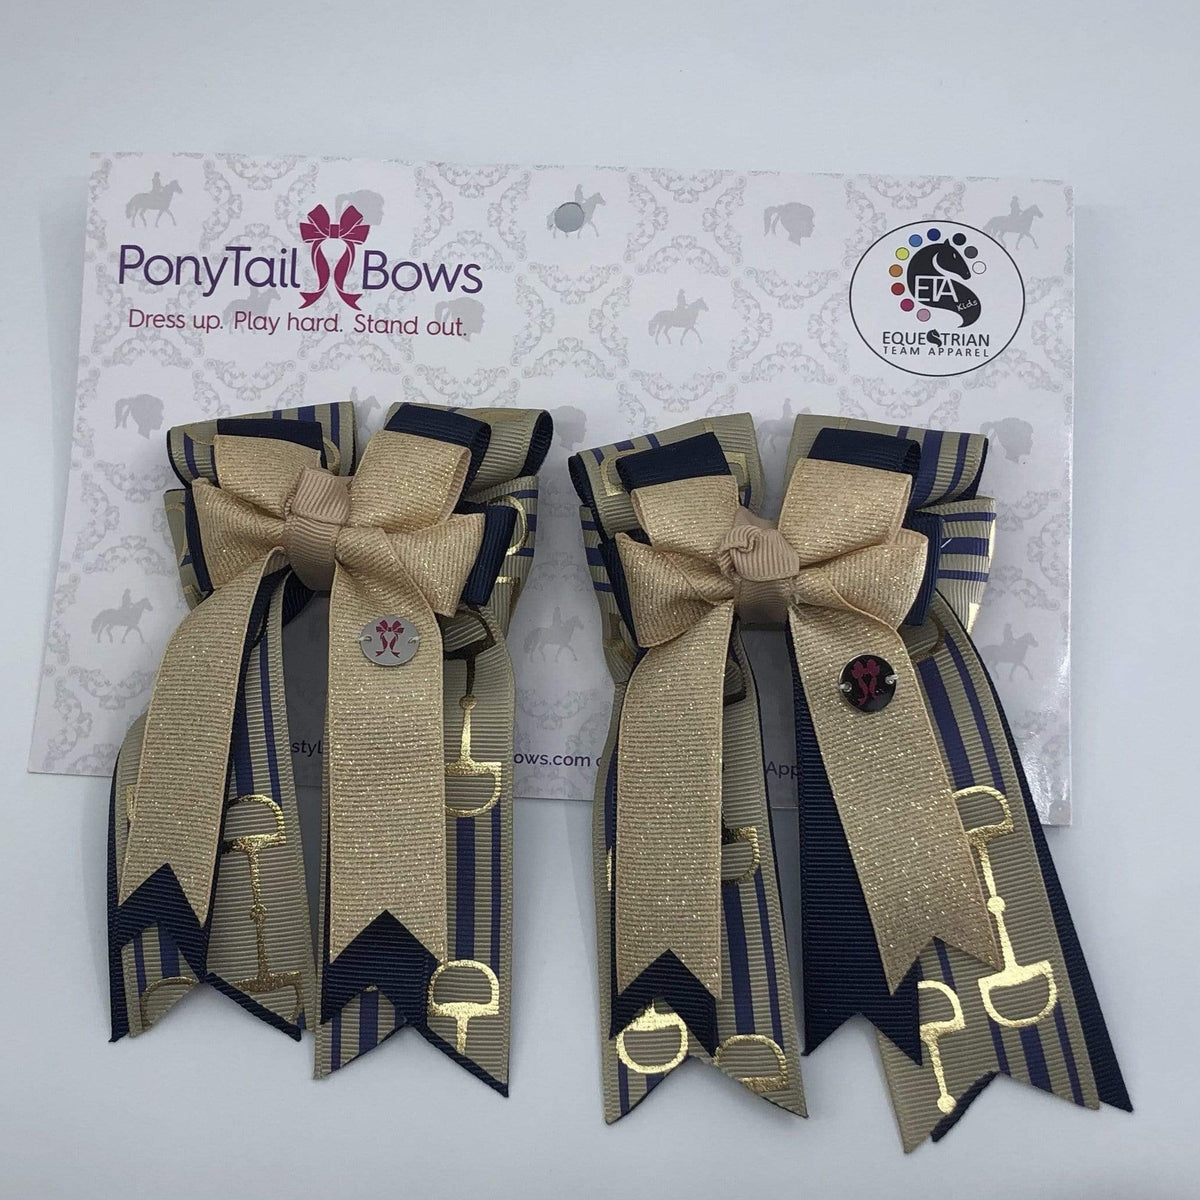 PonyTail Bows 3" Tails Navy Gold Striped Bits PonyTail Bows equestrian team apparel online tack store mobile tack store custom farm apparel custom show stable clothing equestrian lifestyle horse show clothing riding clothes PonyTail Bows | Equestrian Hair Accessories horses equestrian tack store